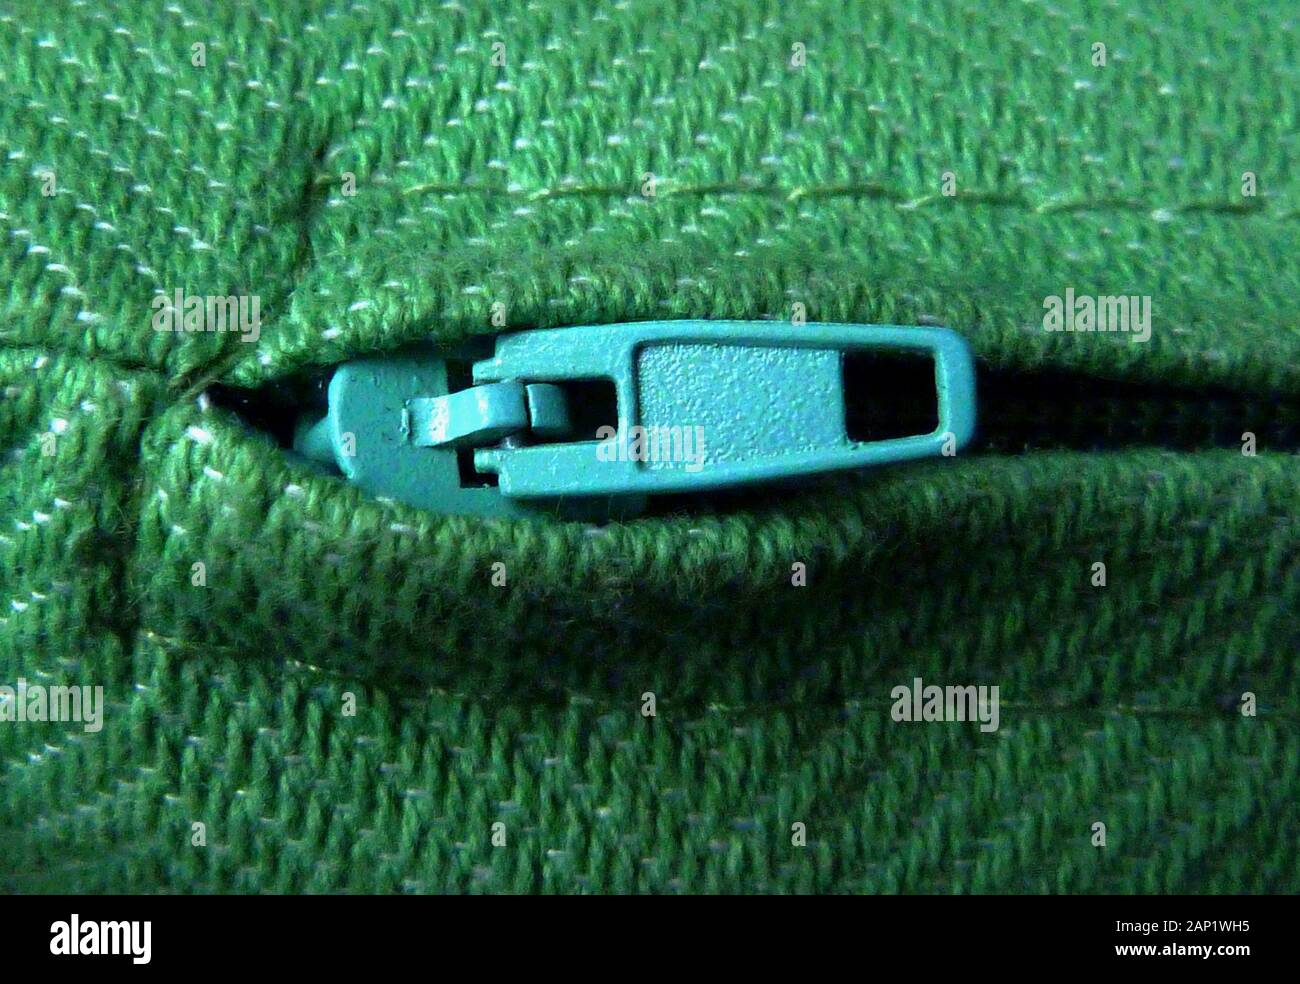 zipper puller macro close up with green wool fabric material and fine stitching. sewing and home decoration concept. fine wool textile thread texture. Stock Photo